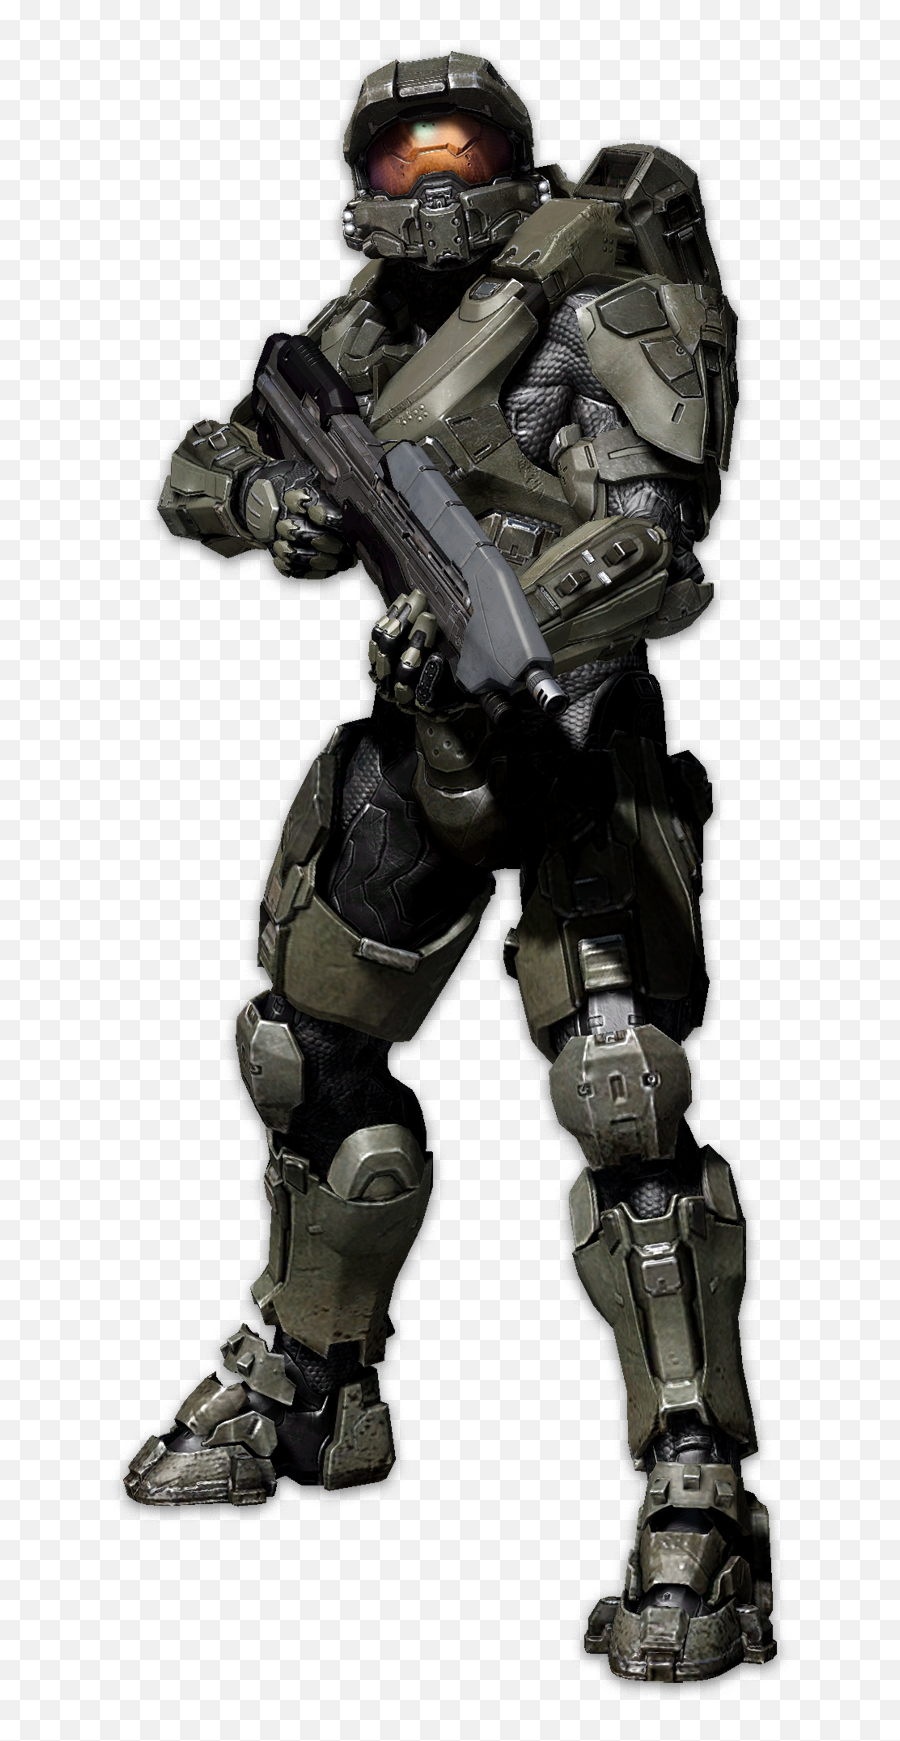 Halo Png Transparent Halopng Images Pluspng - Halo 4 Master Chief Png,Halo Transparent Background